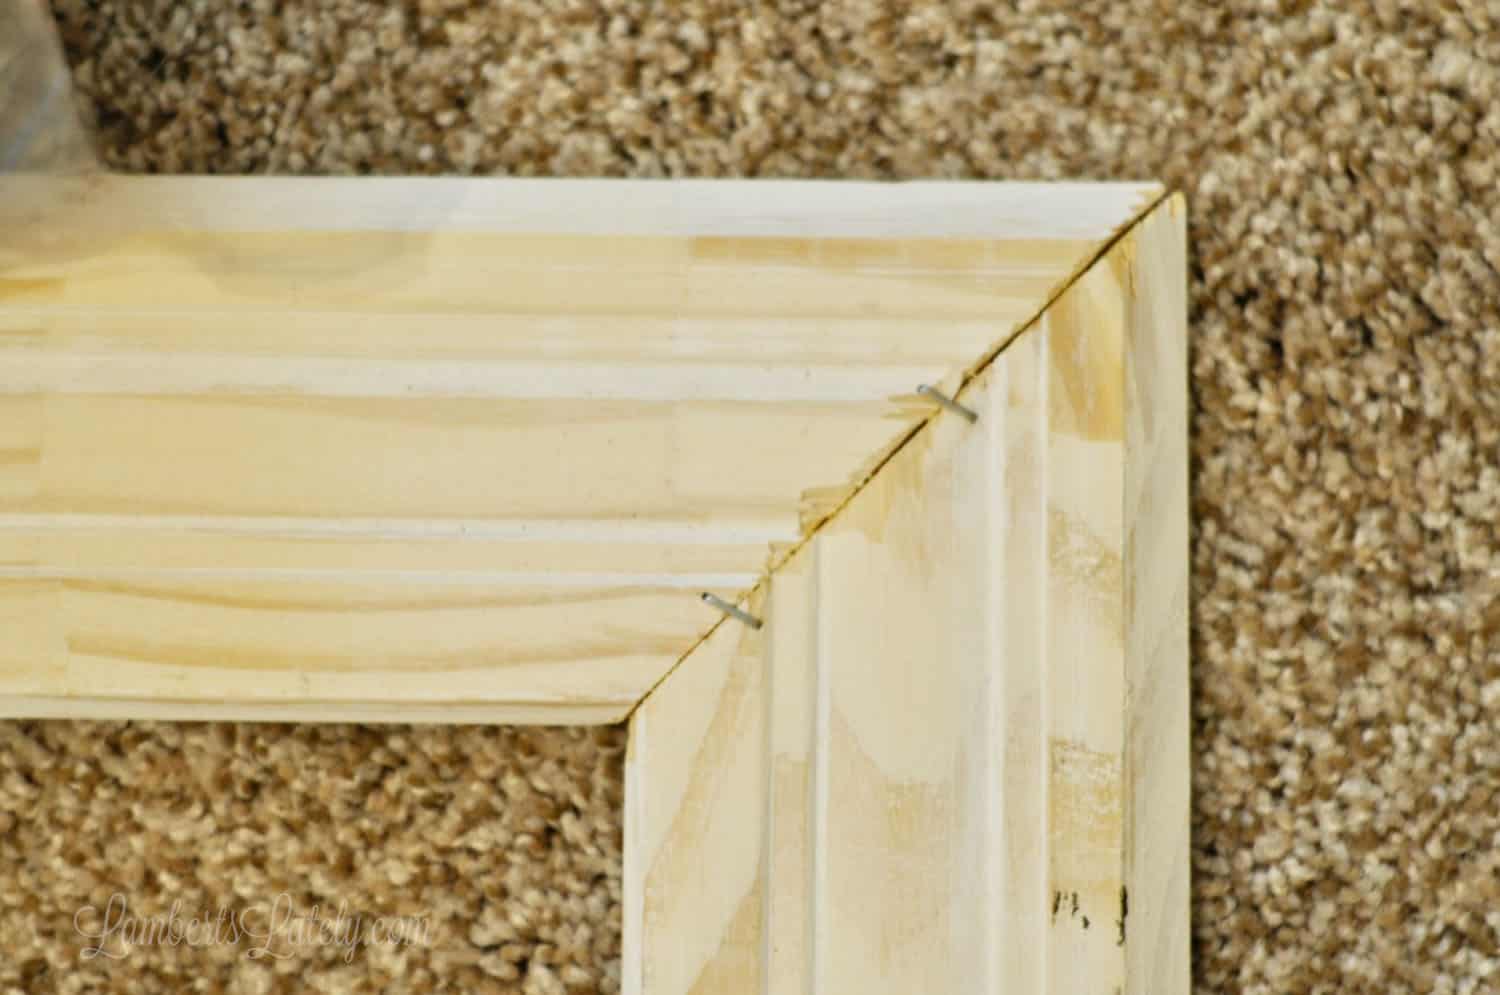 2 pieces of crown molding attached at 45 degree angles with staples.